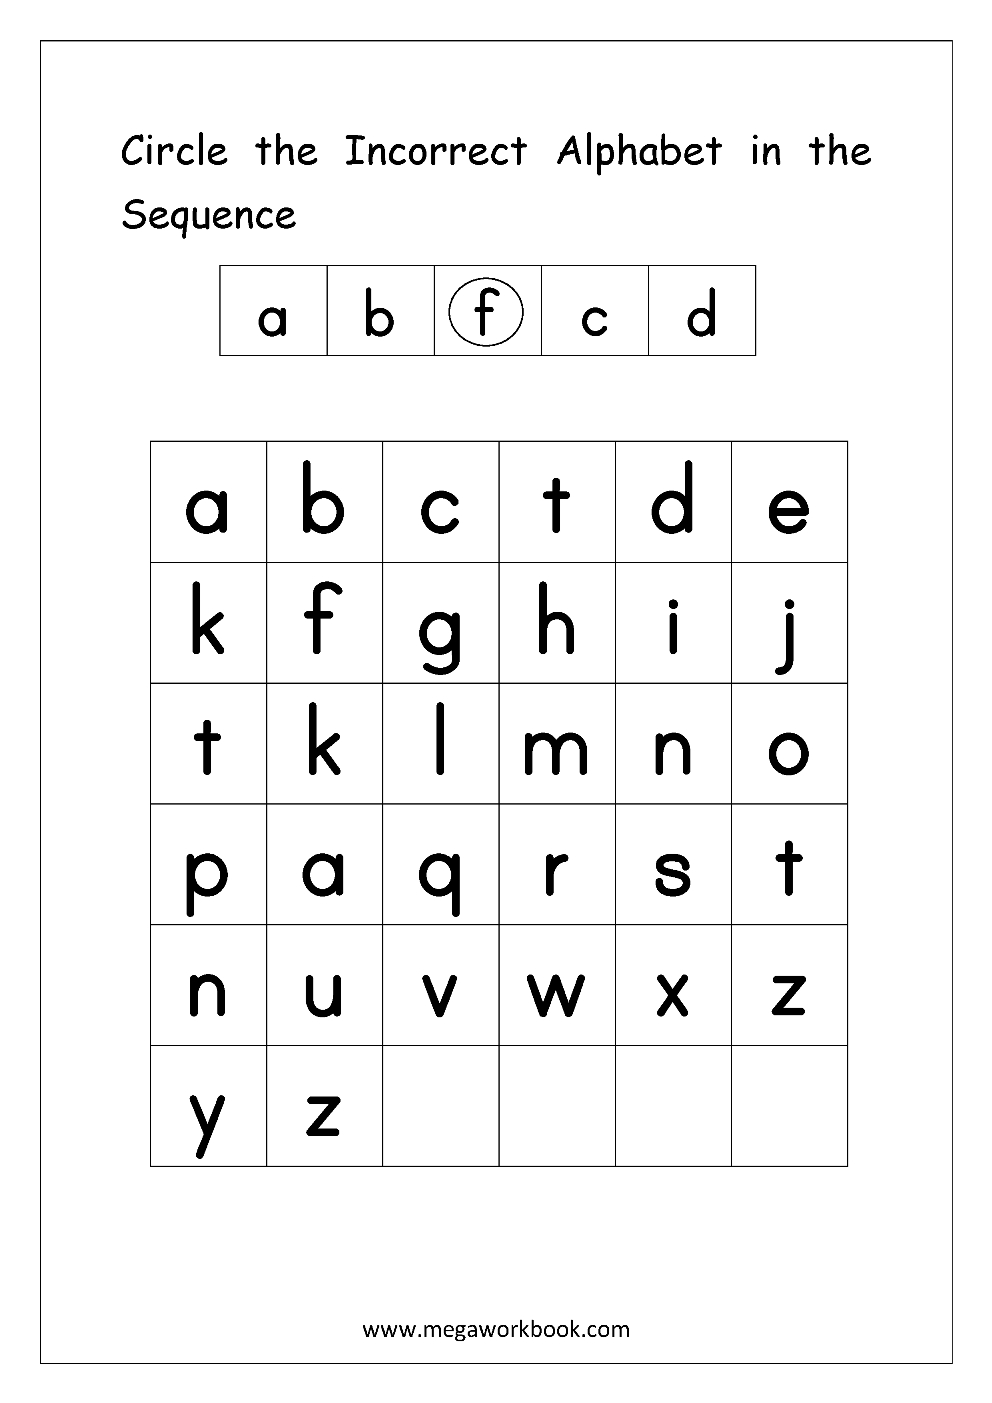 Free English Worksheets - Alphabetical Sequence in Alphabet Order Worksheets Free